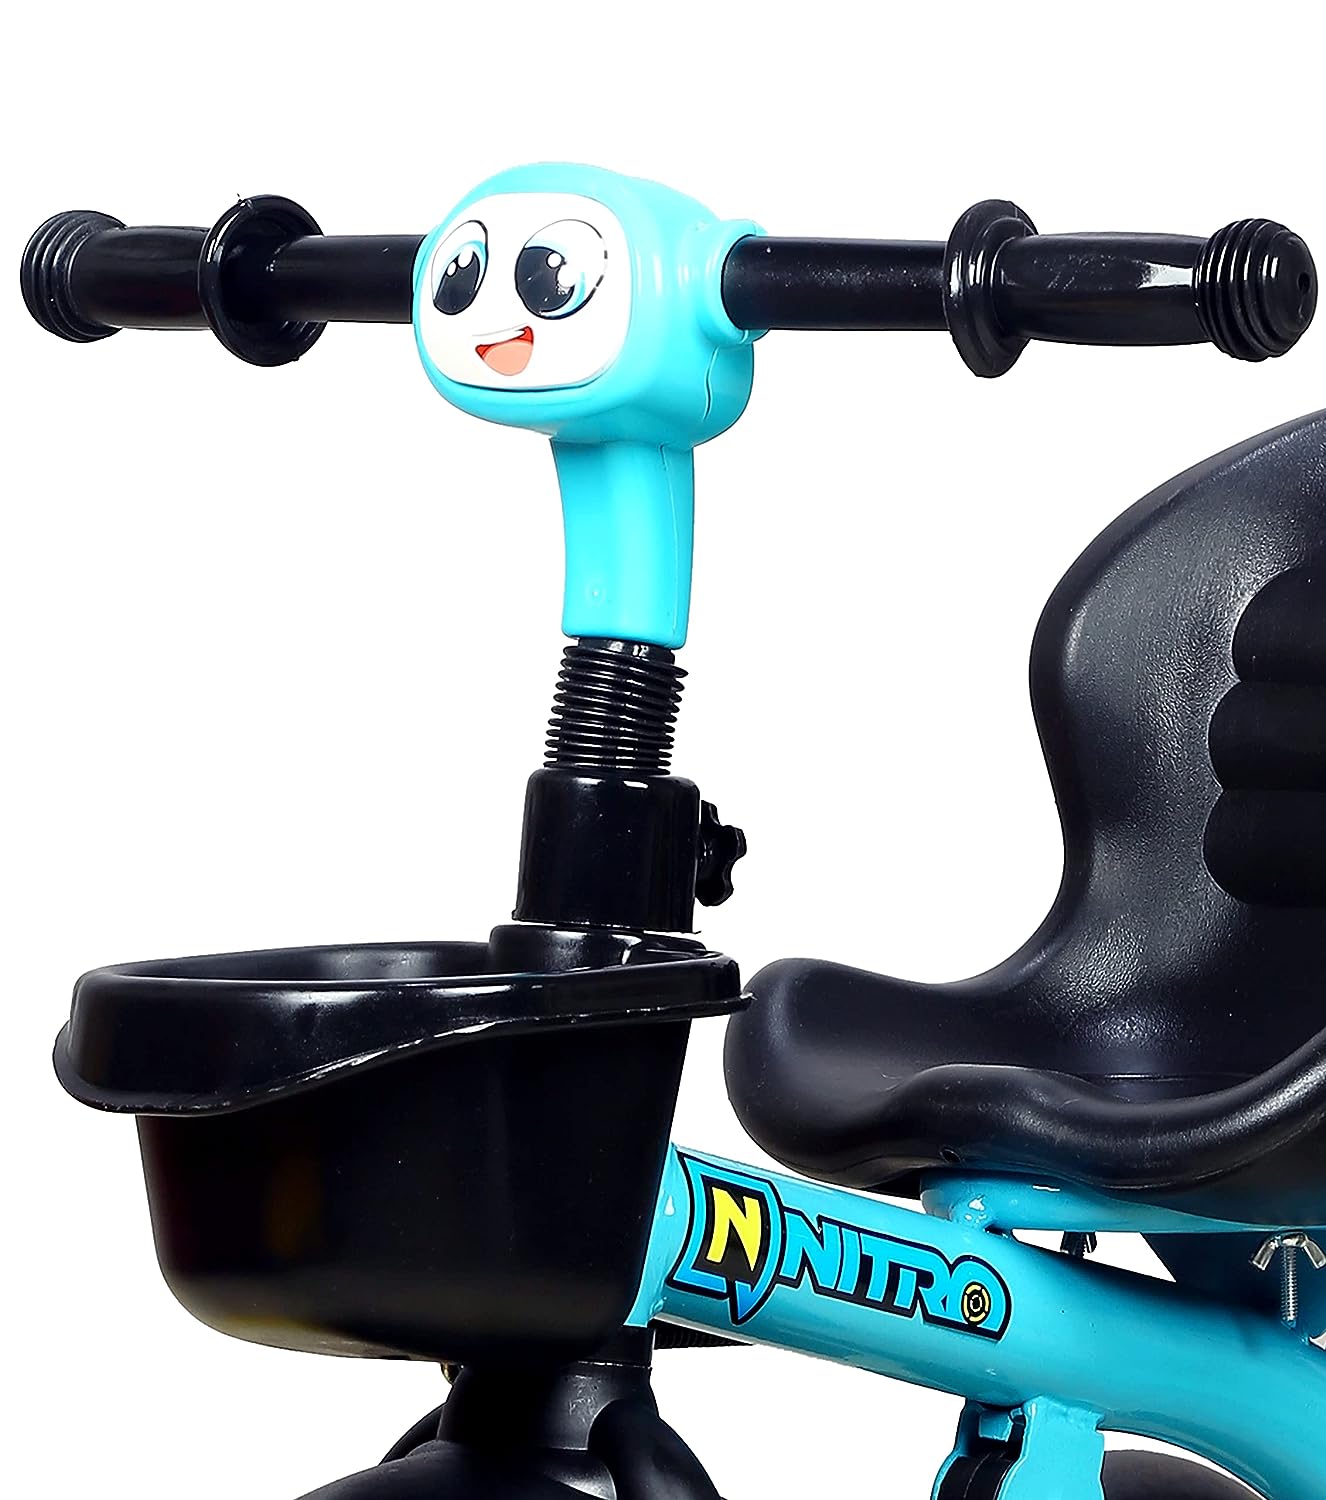 Luusa Nitro 250 TRICYCLE: A Fun and Sturdy Metal Tricycle with Cartoon Charm